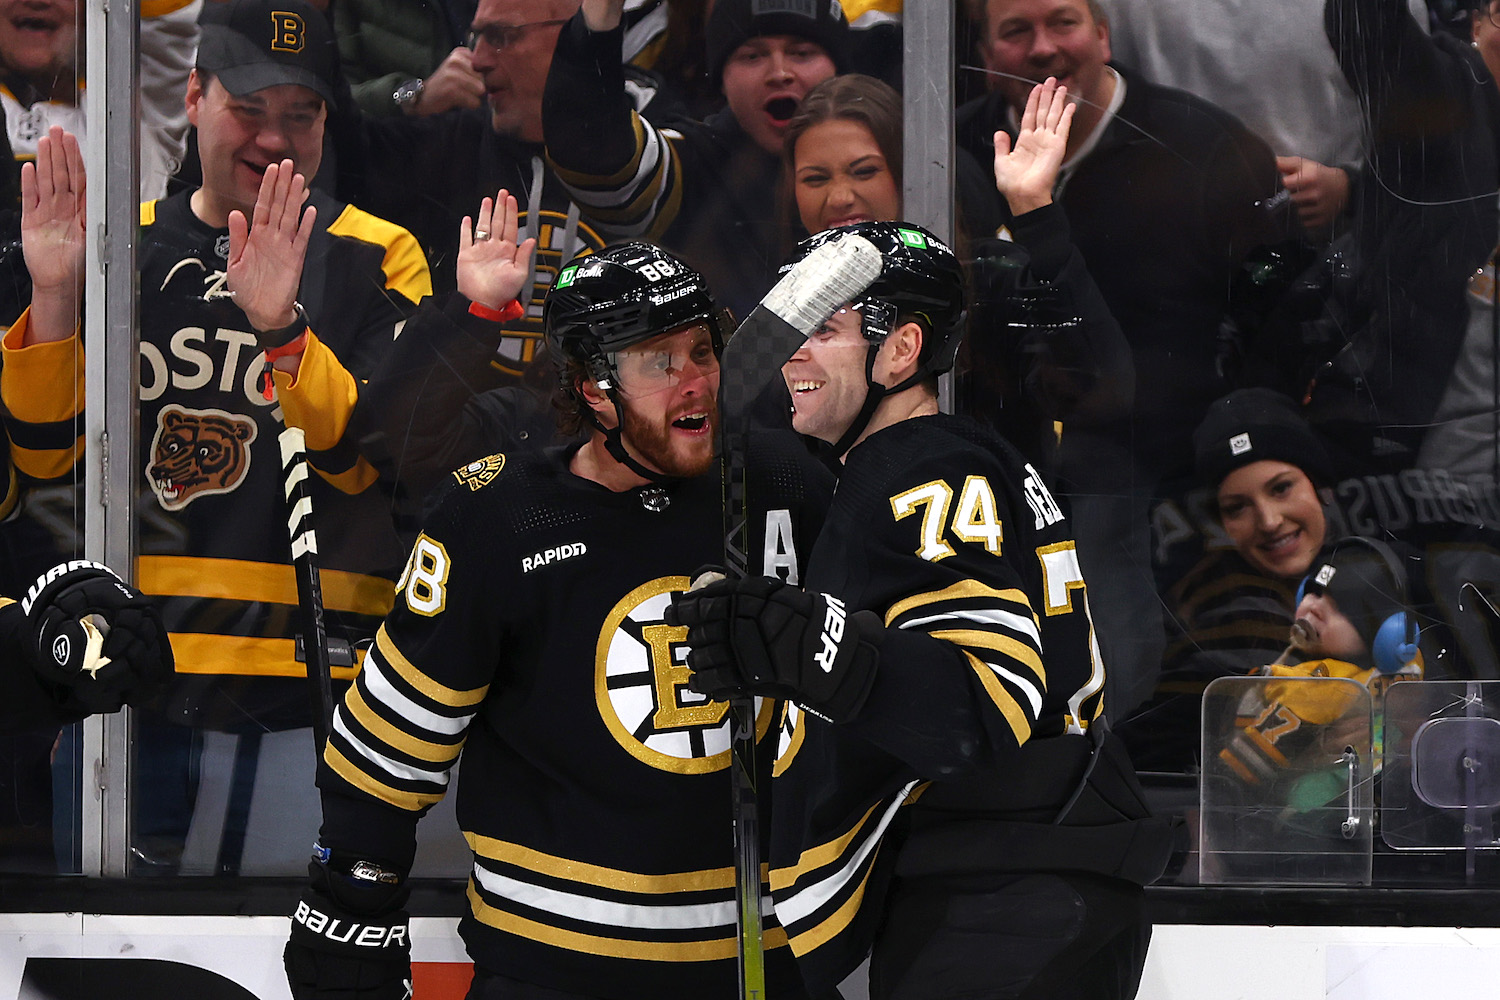 BOSTON, MASSACHUSETTS - JANUARY 18: David Pastrnak #88 of the Boston Bruins celebrates with Jake DeBrusk #74 after scoring against the Colorado Avalanche during the third period at TD Garden on January 18, 2024 in Boston, Massachusetts. The Bruins defeat the Avalanche 5-2. (Photo by Maddie Meyer/Getty Images)